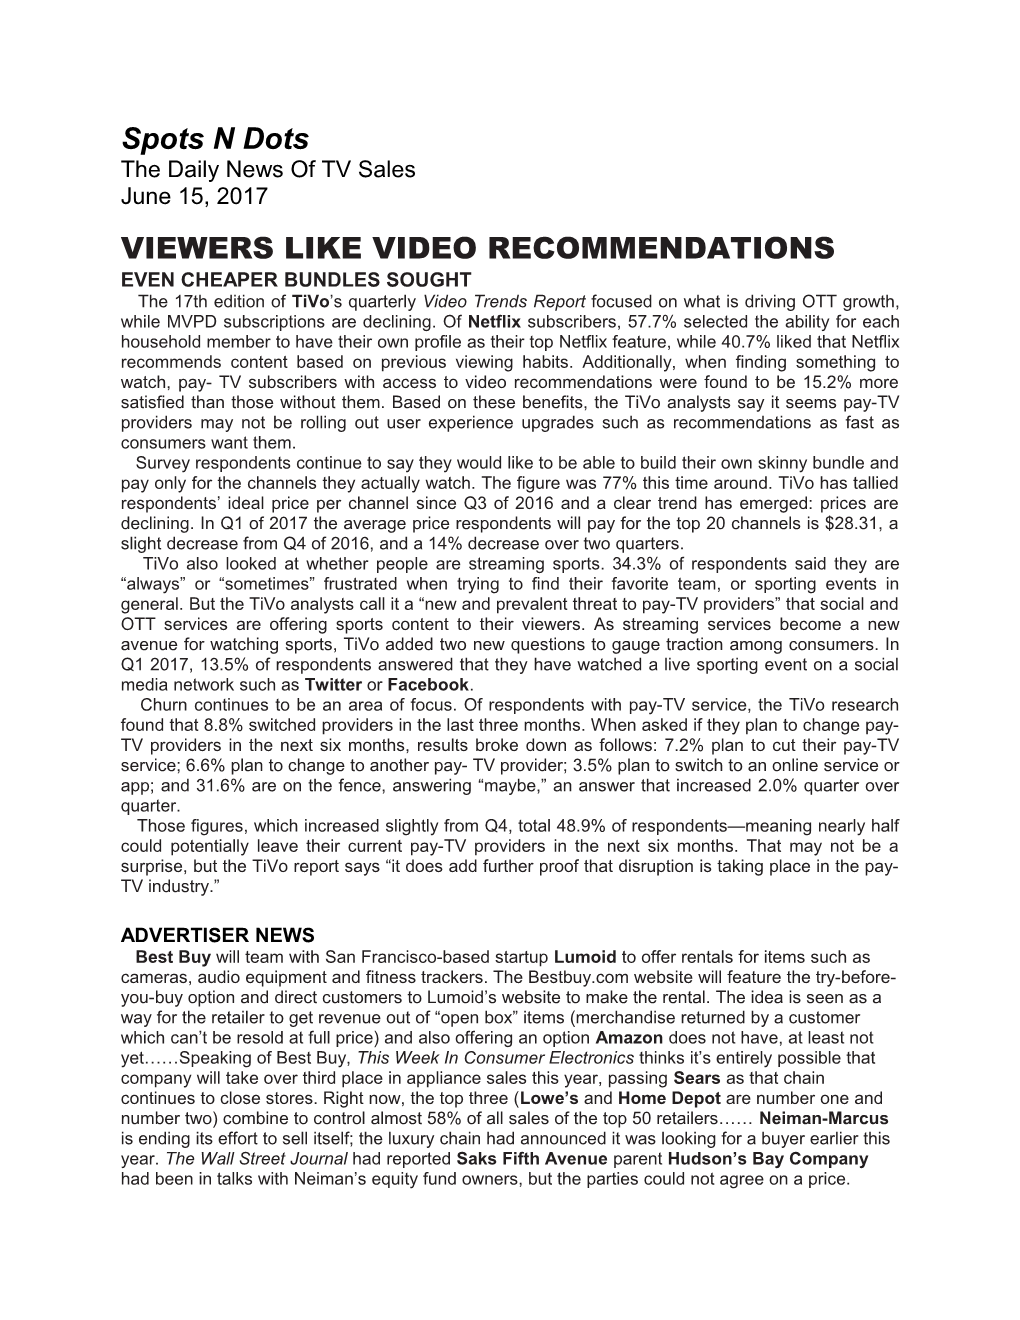 Viewers Like Video Recommendations